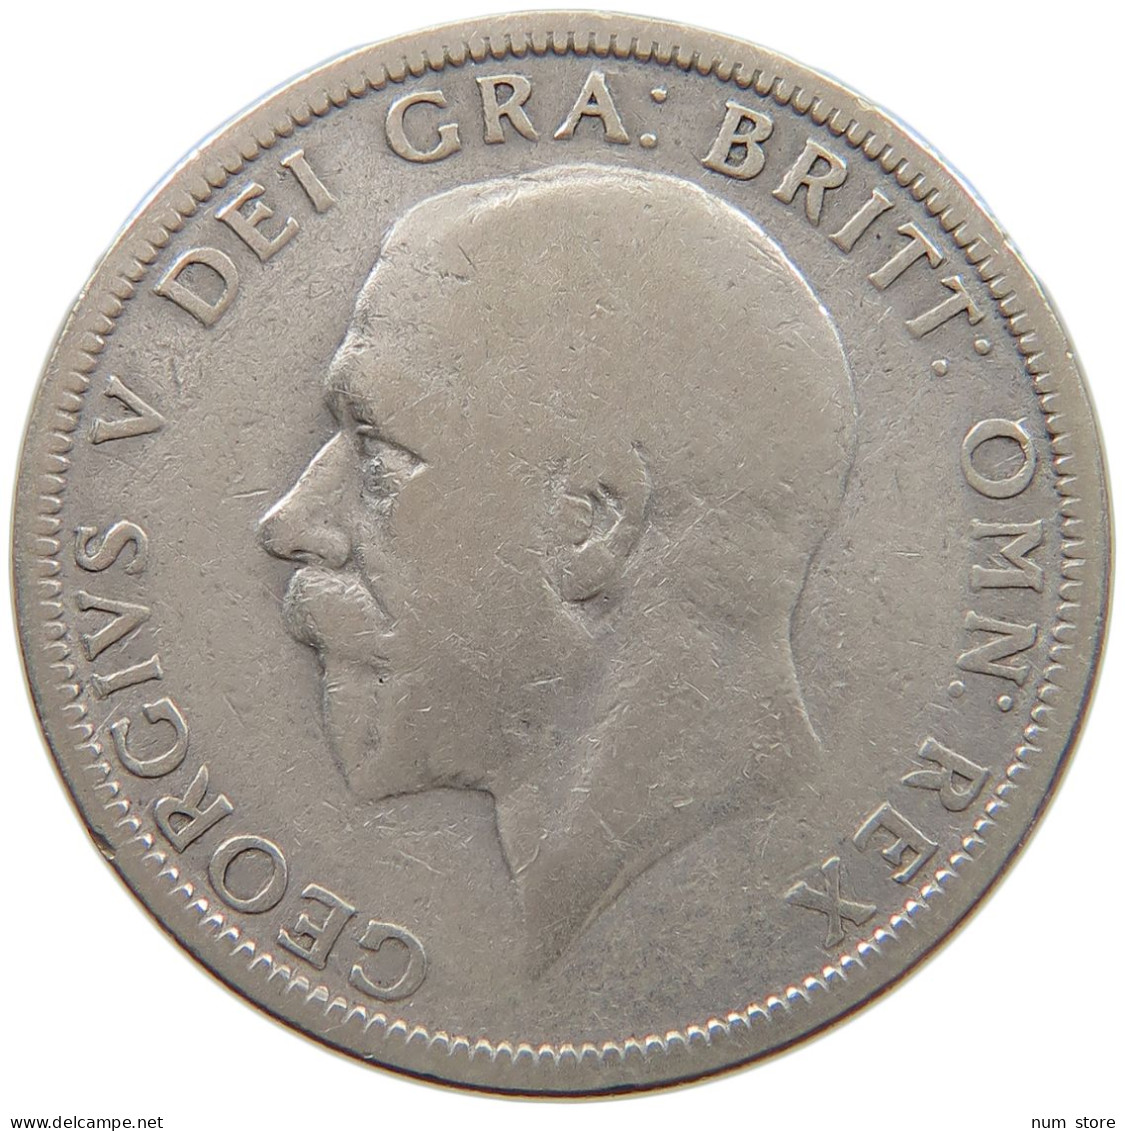 GREAT BRITAIN FLORIN 1929 George V. (1910-1936) #a063 0737 - J. 1 Florin / 2 Schillings